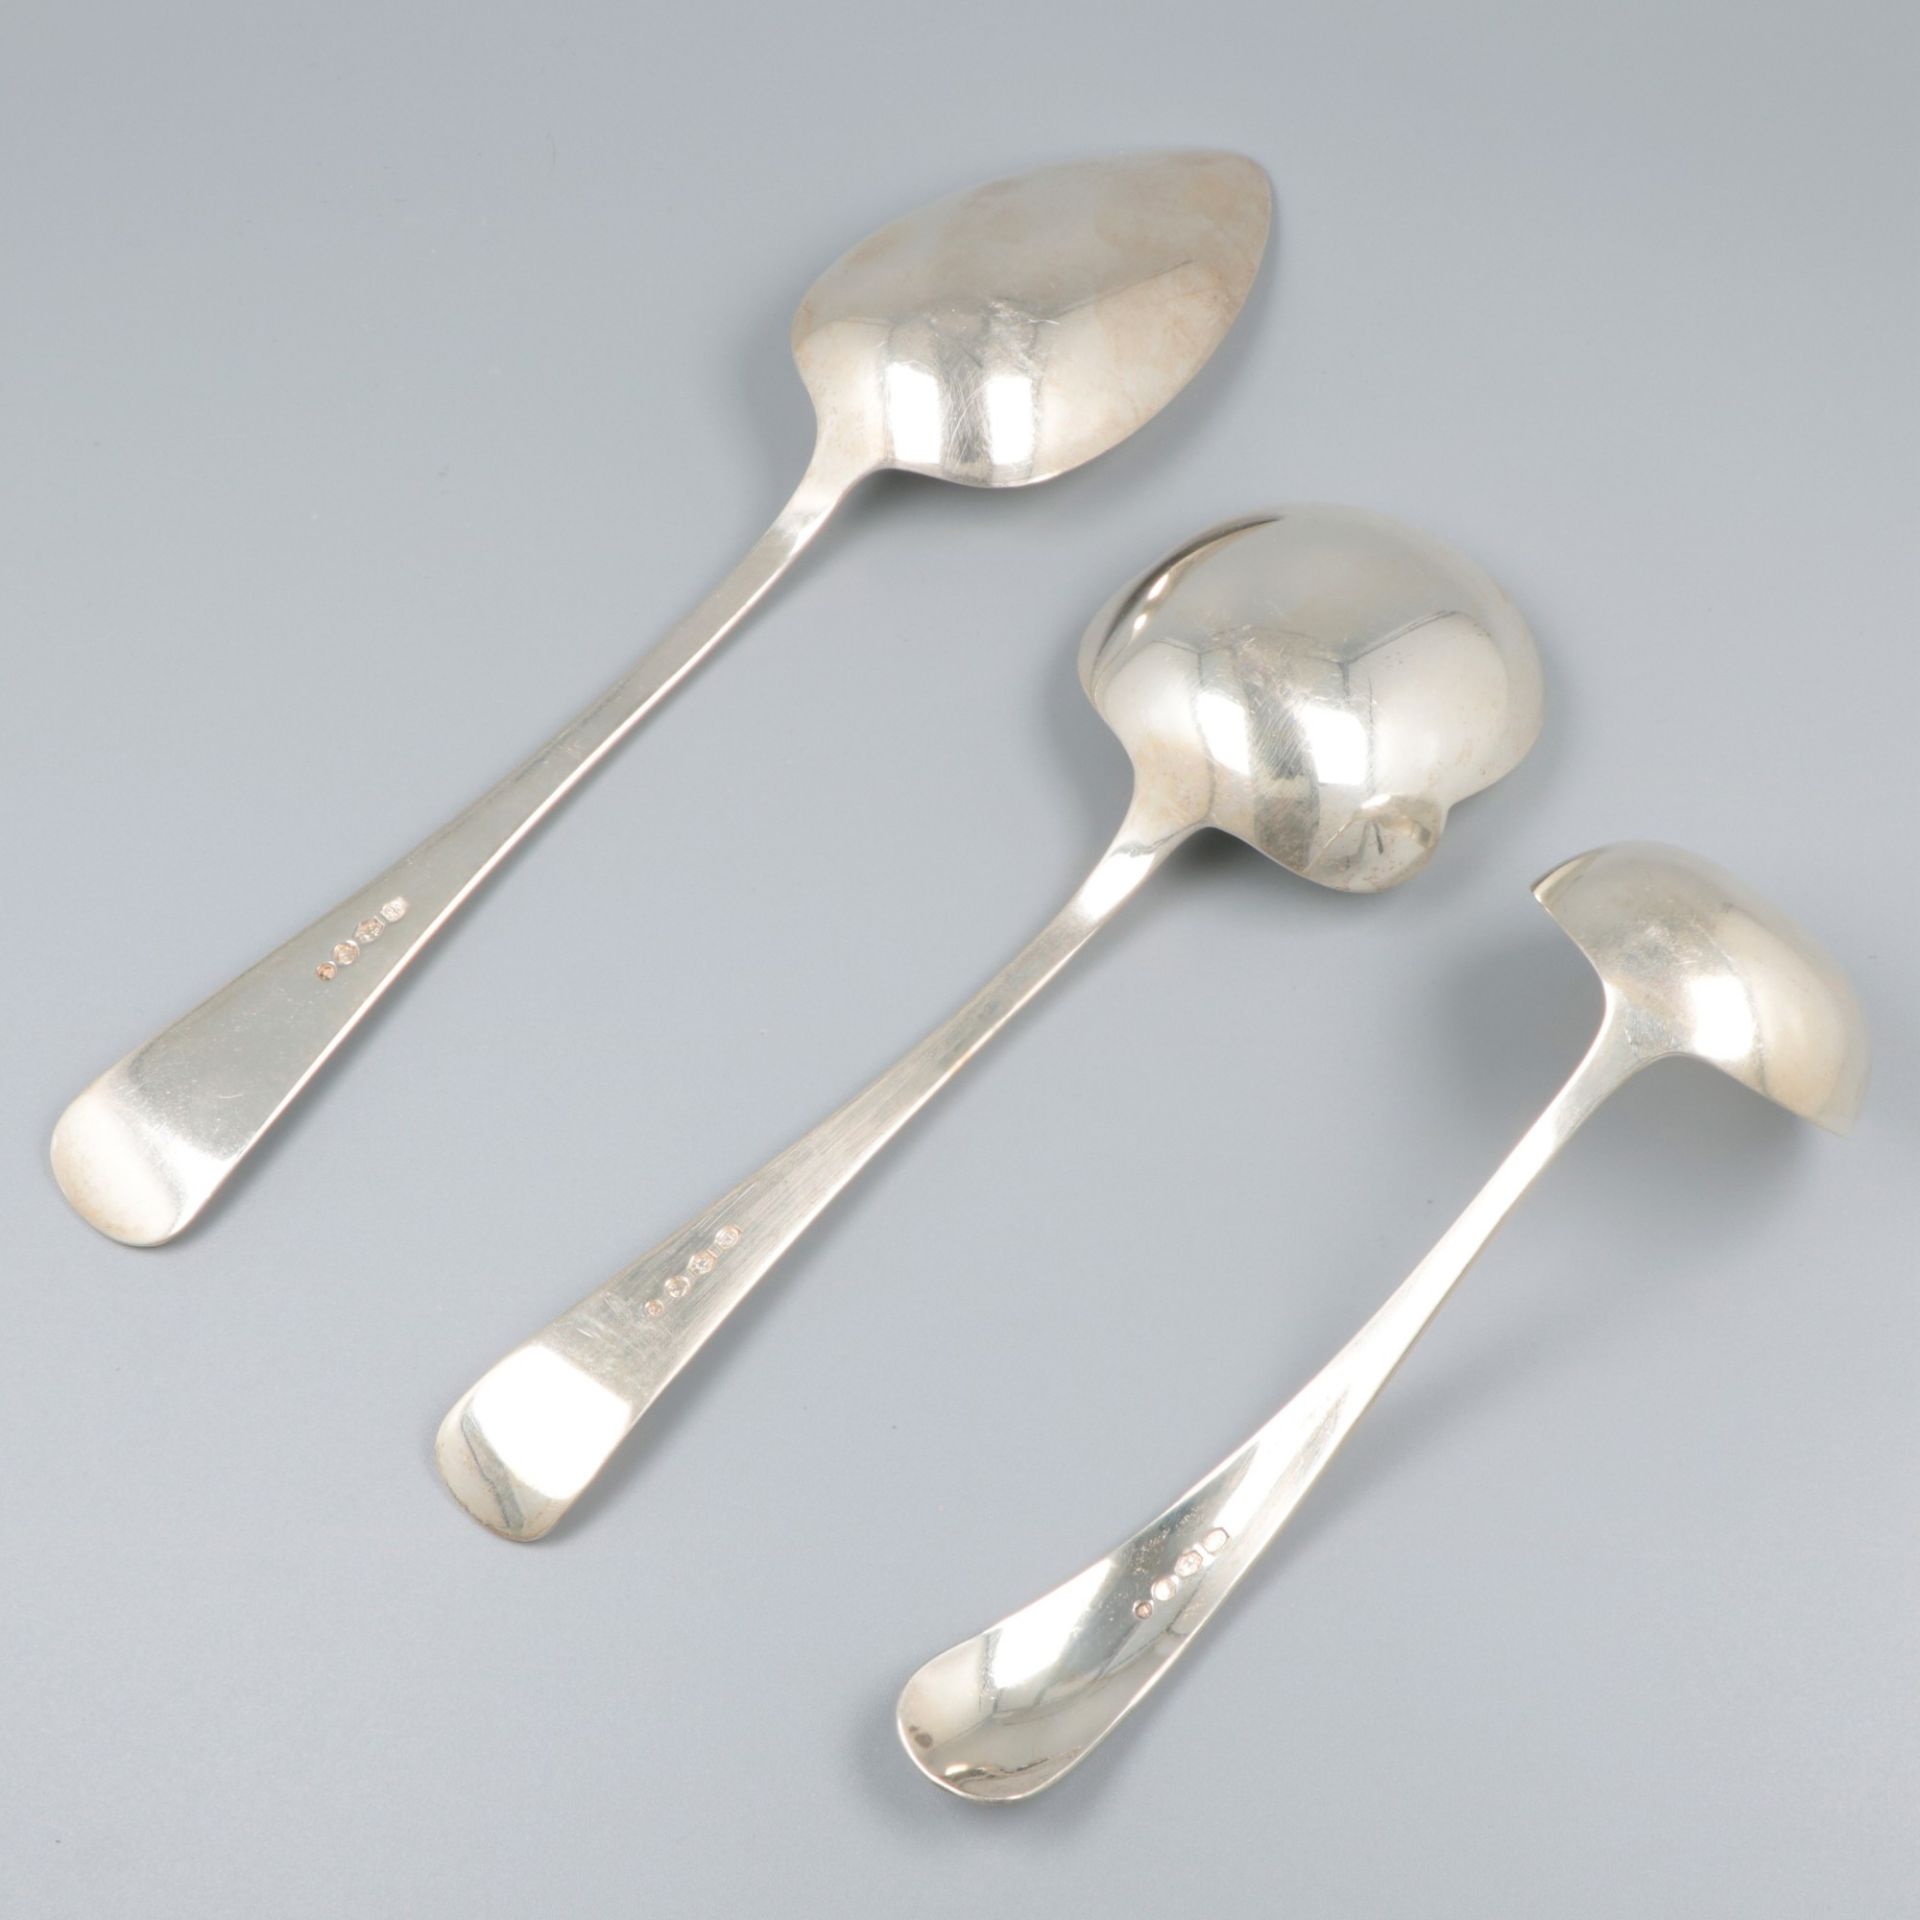 Sauce spoon, vegetable serving spoon & potato serving spoon "Haags Lofje", silver. - Image 5 of 6